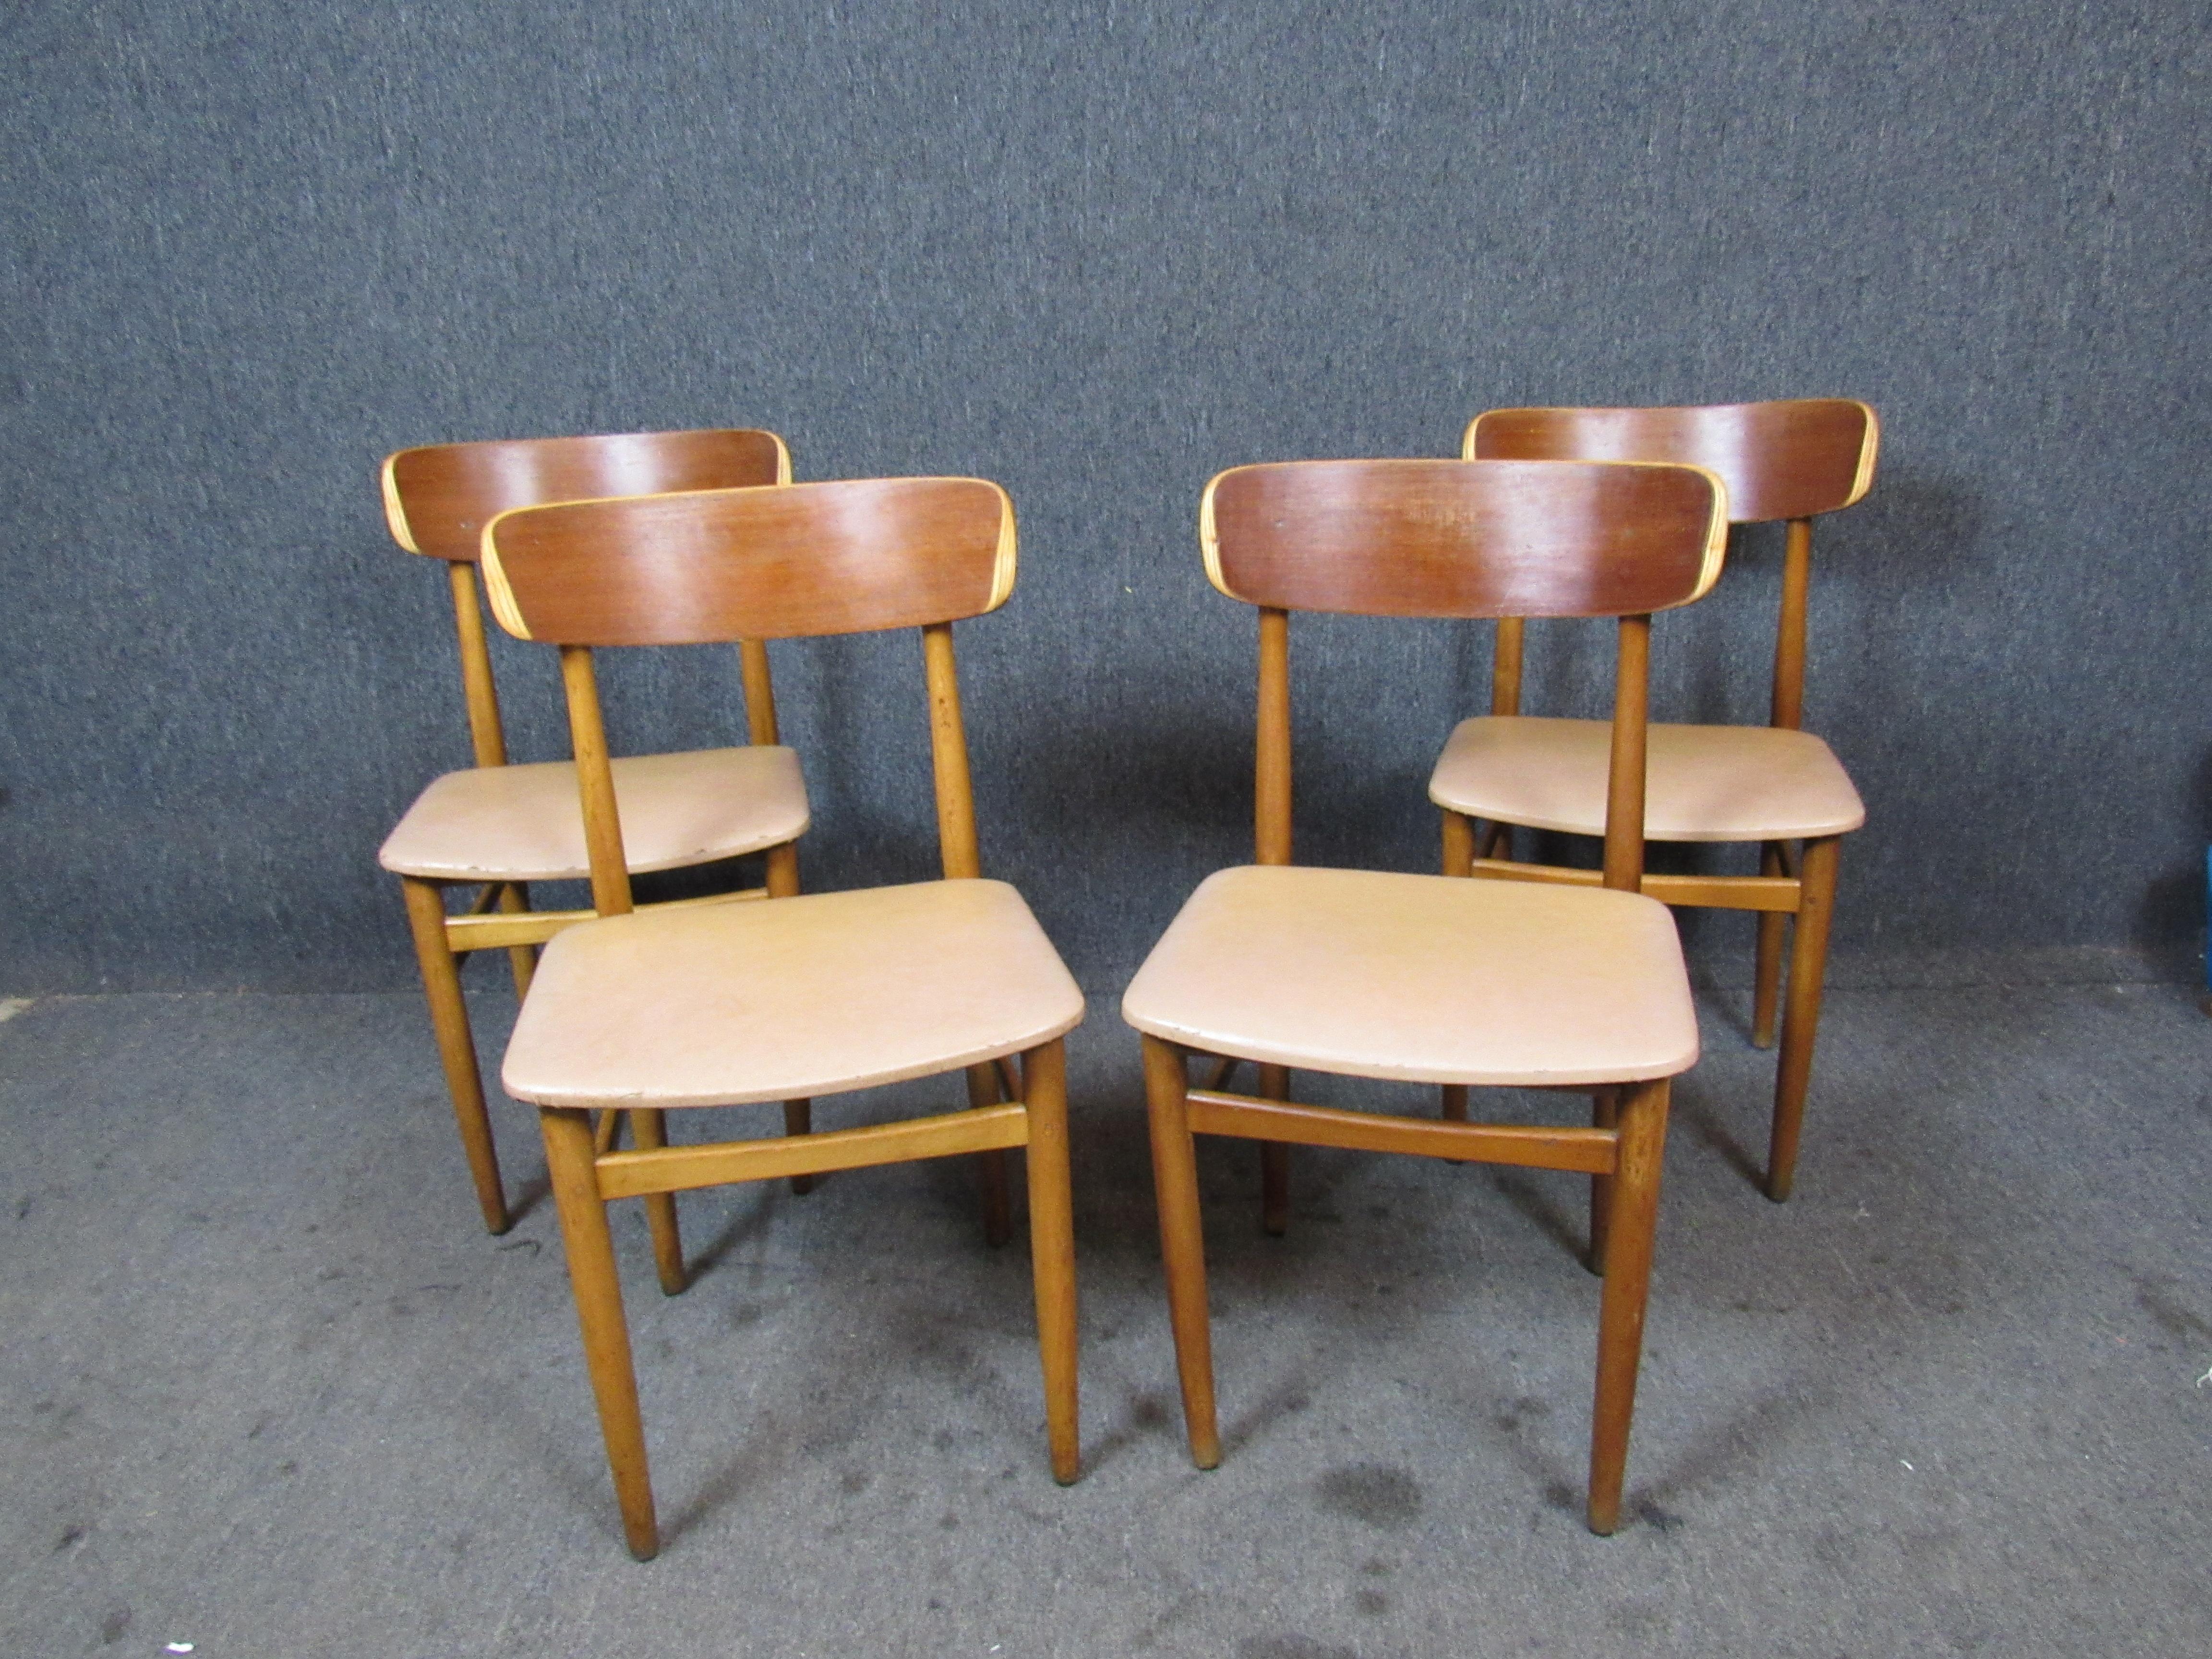 Fantastic set of compact vintage Danish dining chairs, featuring unique bent plywood backs for that Classic Mid-Century Modern aesthetic. Lightweight dining chairs are perfect for apartments or other small spaces where frequent rearrangement is